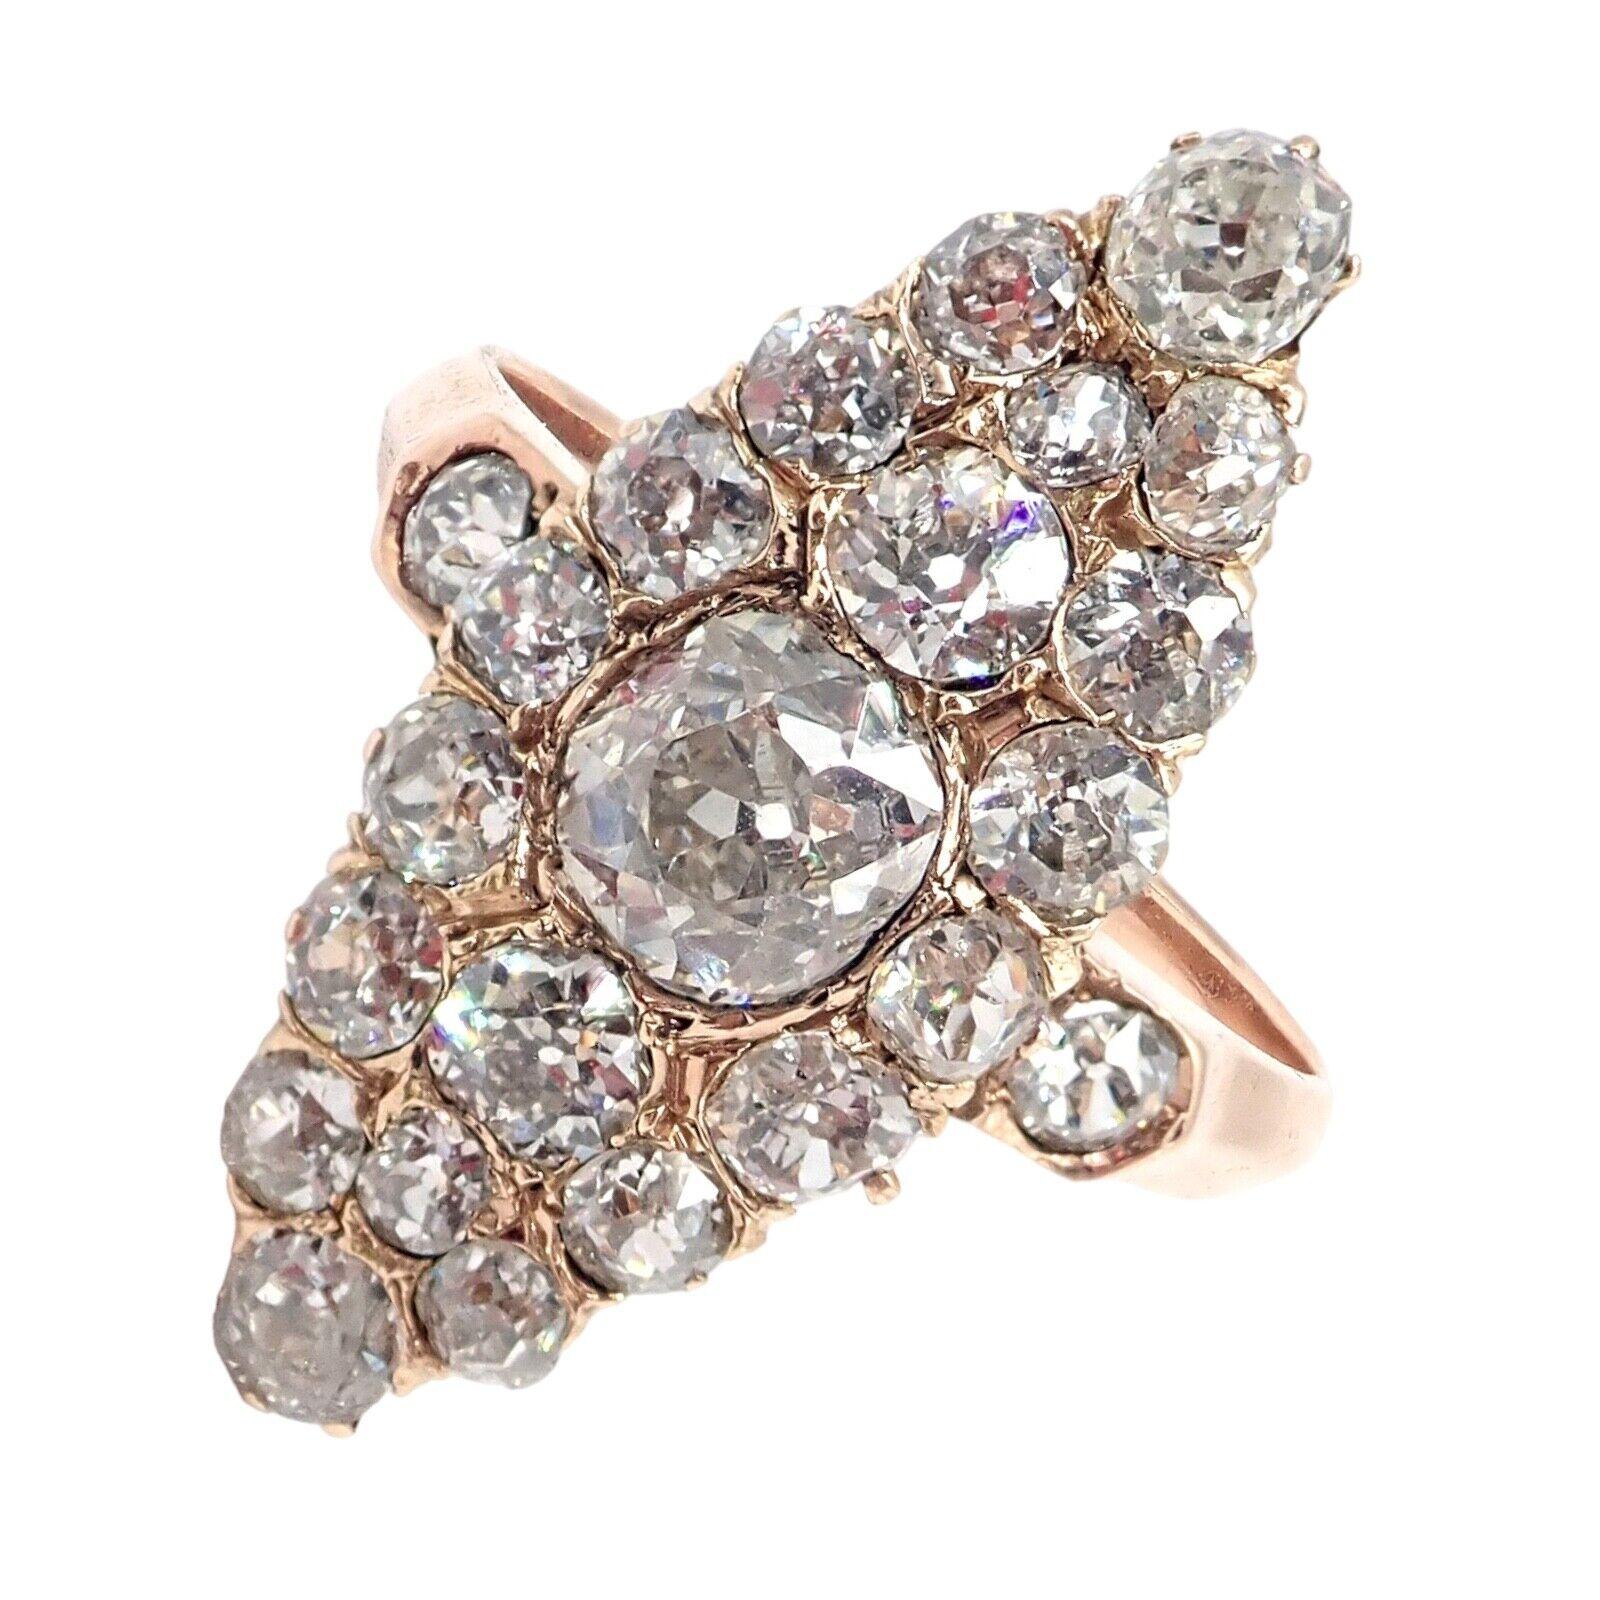 Antique Vintage Estate 18k Rose Gold 4ct Total Weight Old Miner Diamond Ring.
Authentic antique vintage 18k rose gold ring. 
Center stone is old miner cut diamond est 0.80ct. Accented with 3ct in old miner diamonds.
With Center Diamond - Old Miner